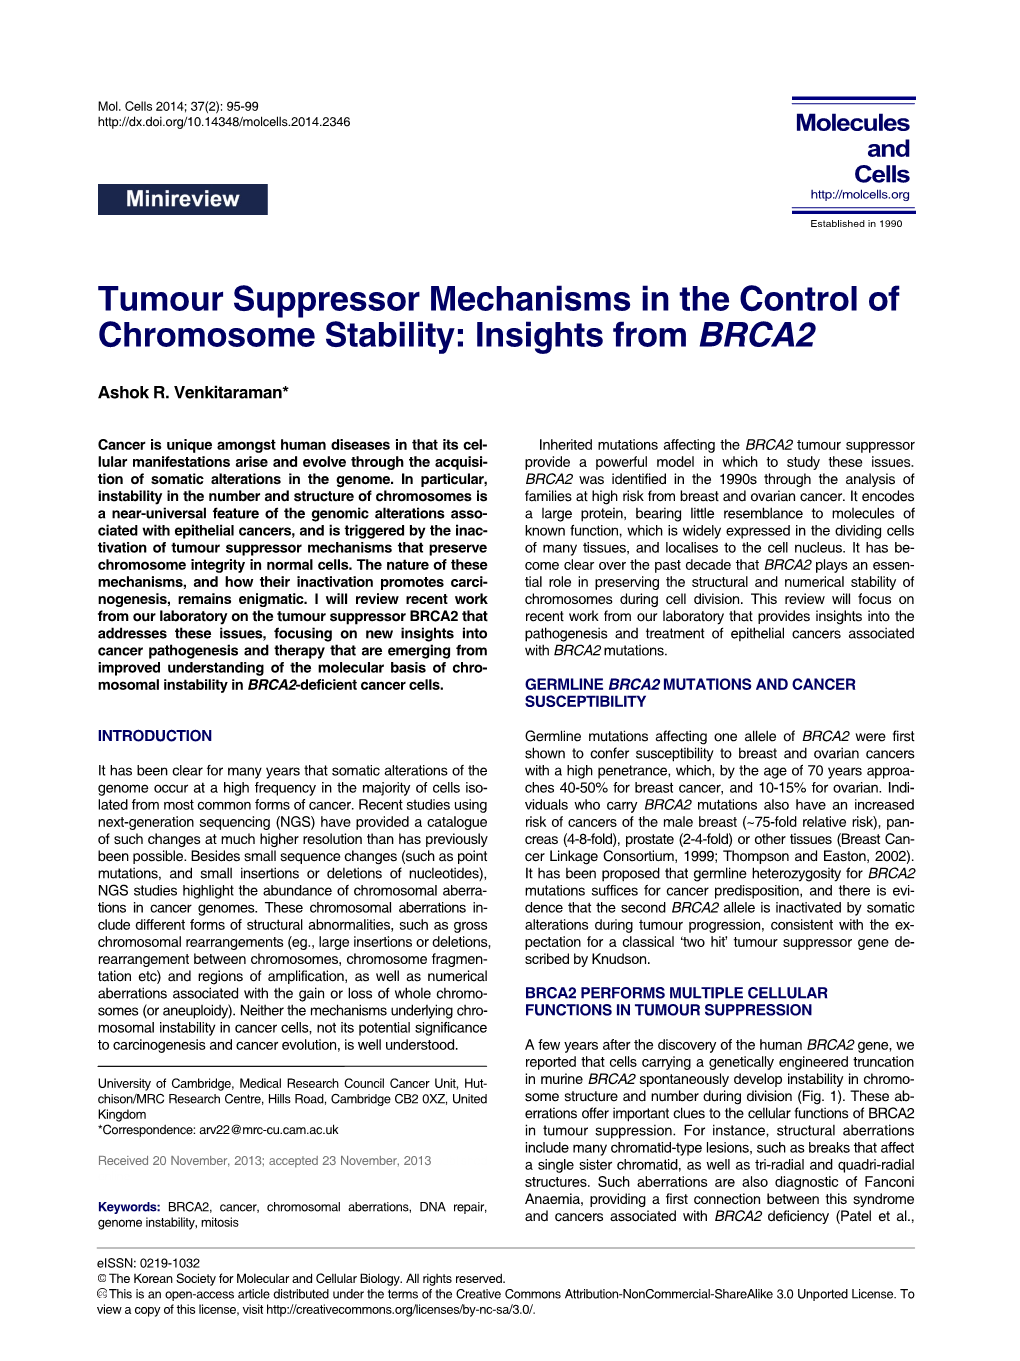 Tumour Suppressor Mechanisms in the Control of Chromosome Stability: Insights from BRCA2